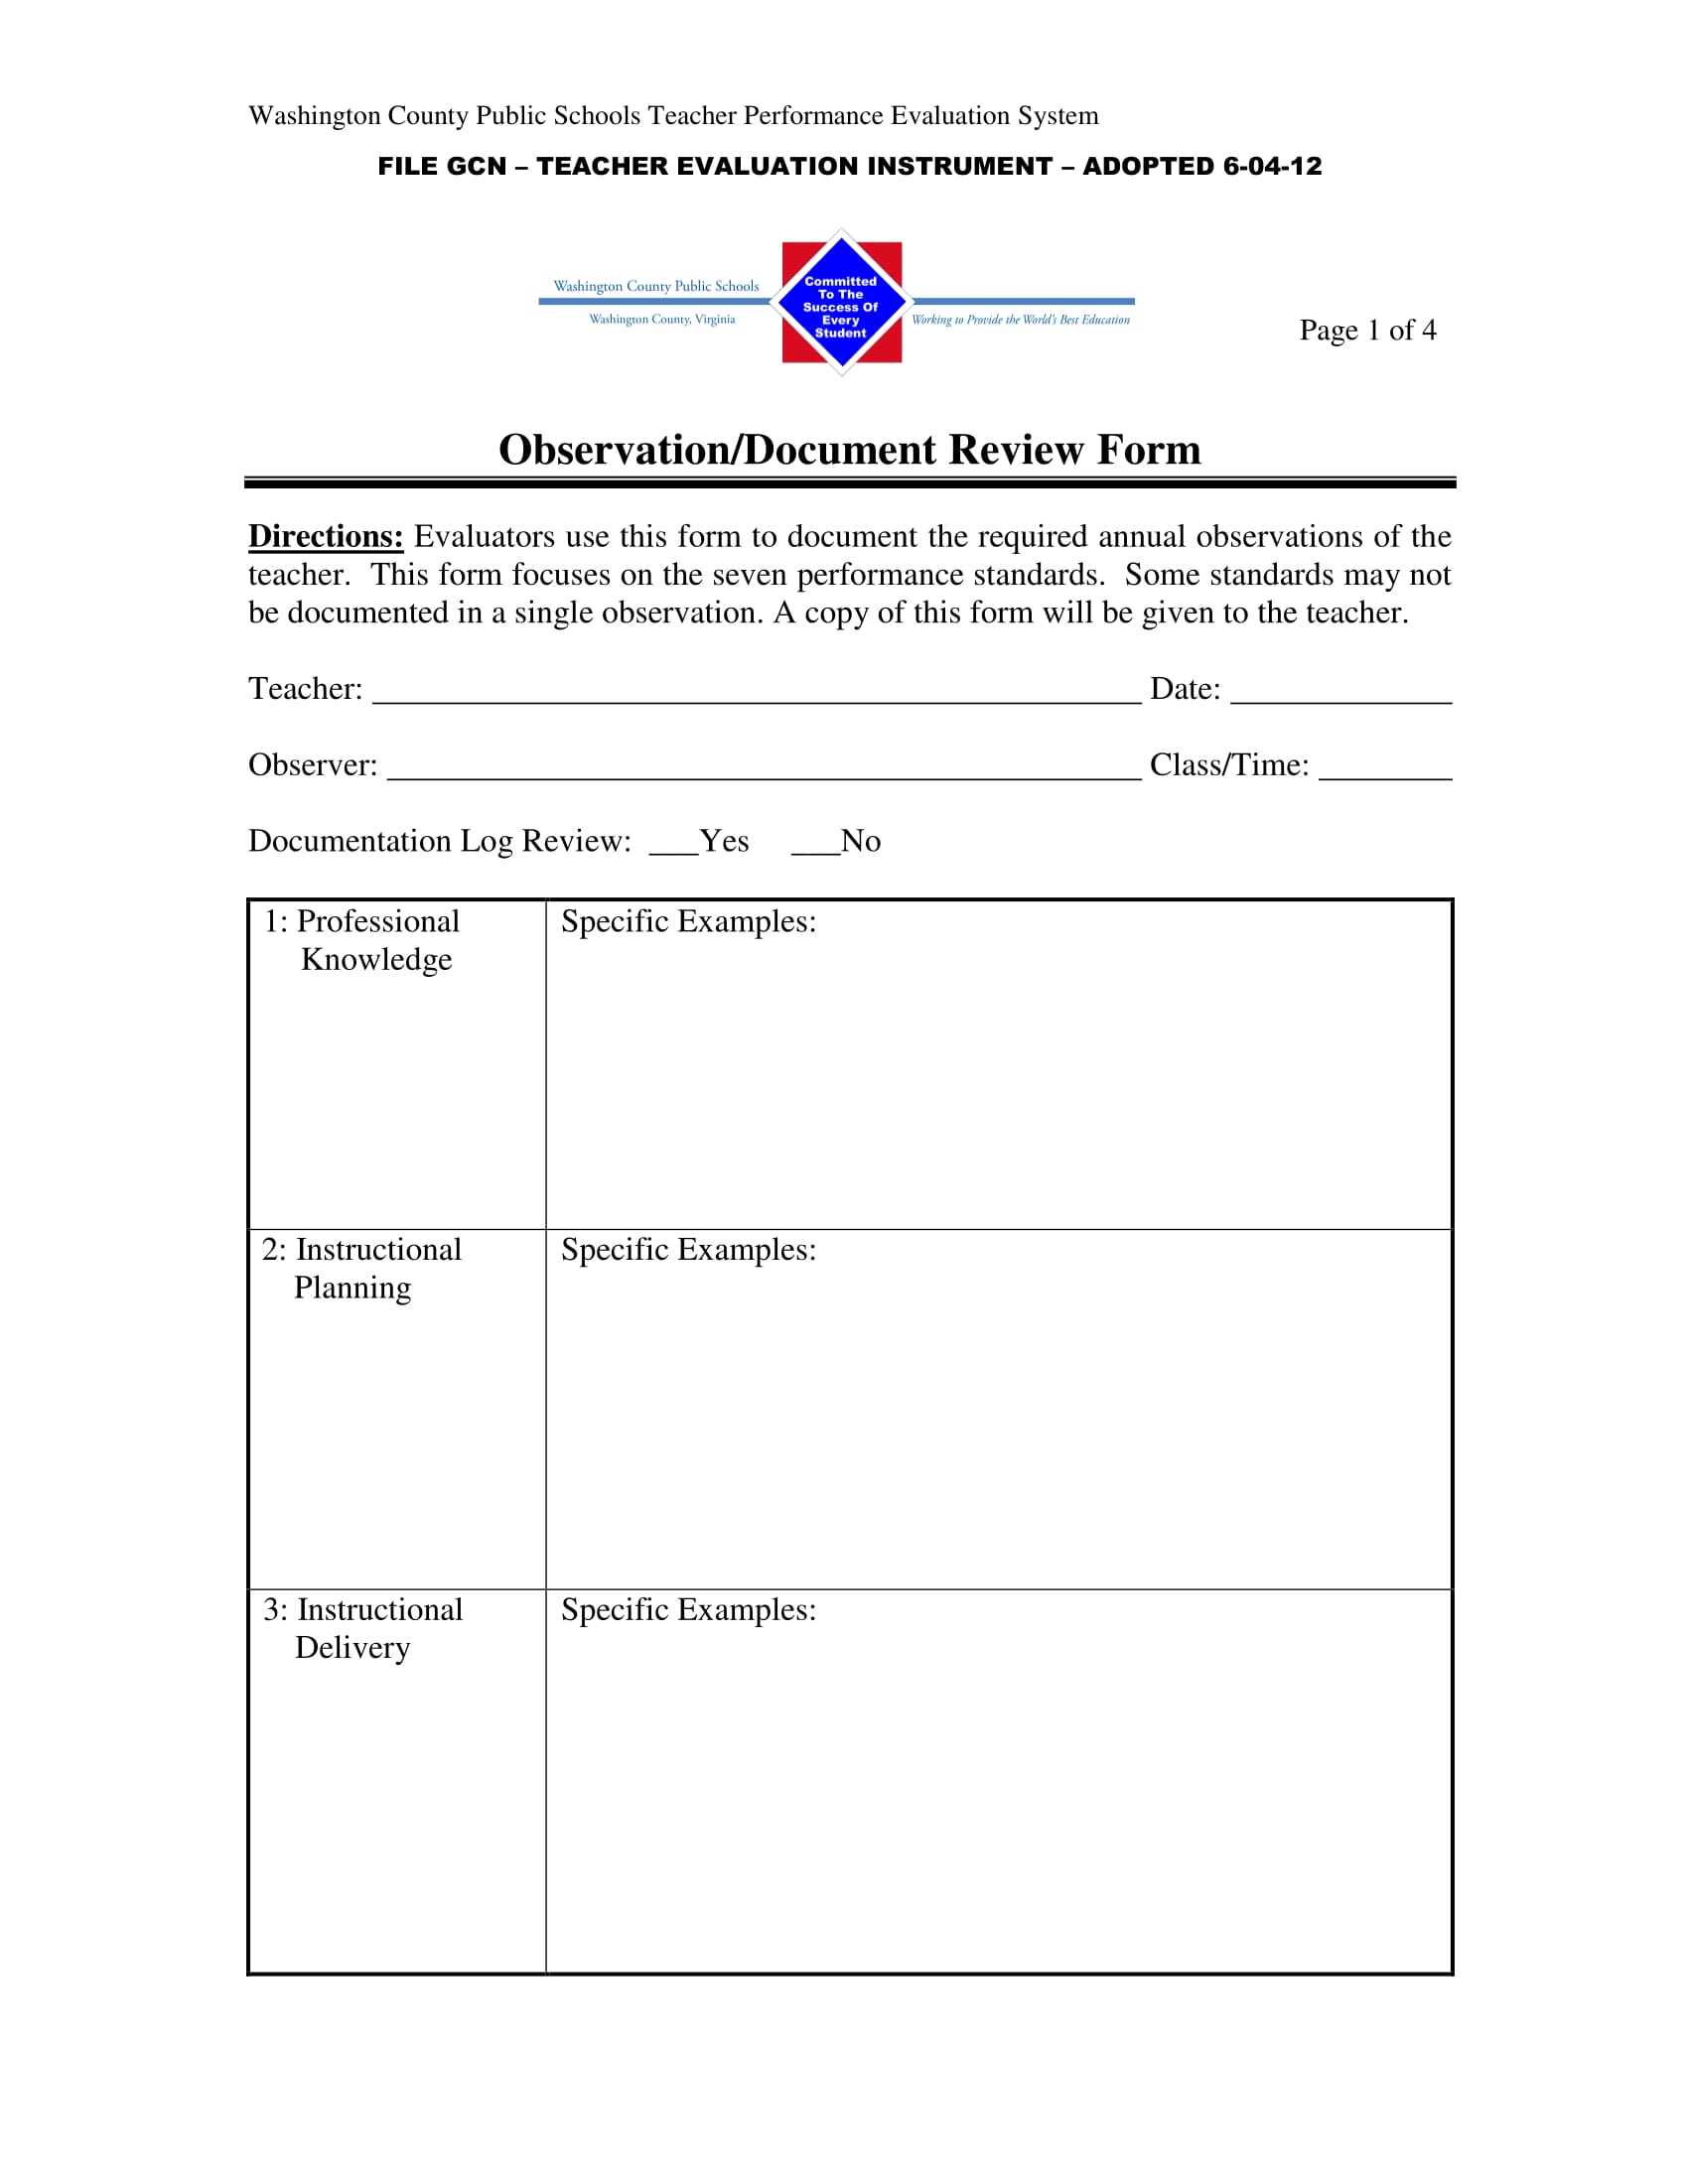 observation and document review form 1